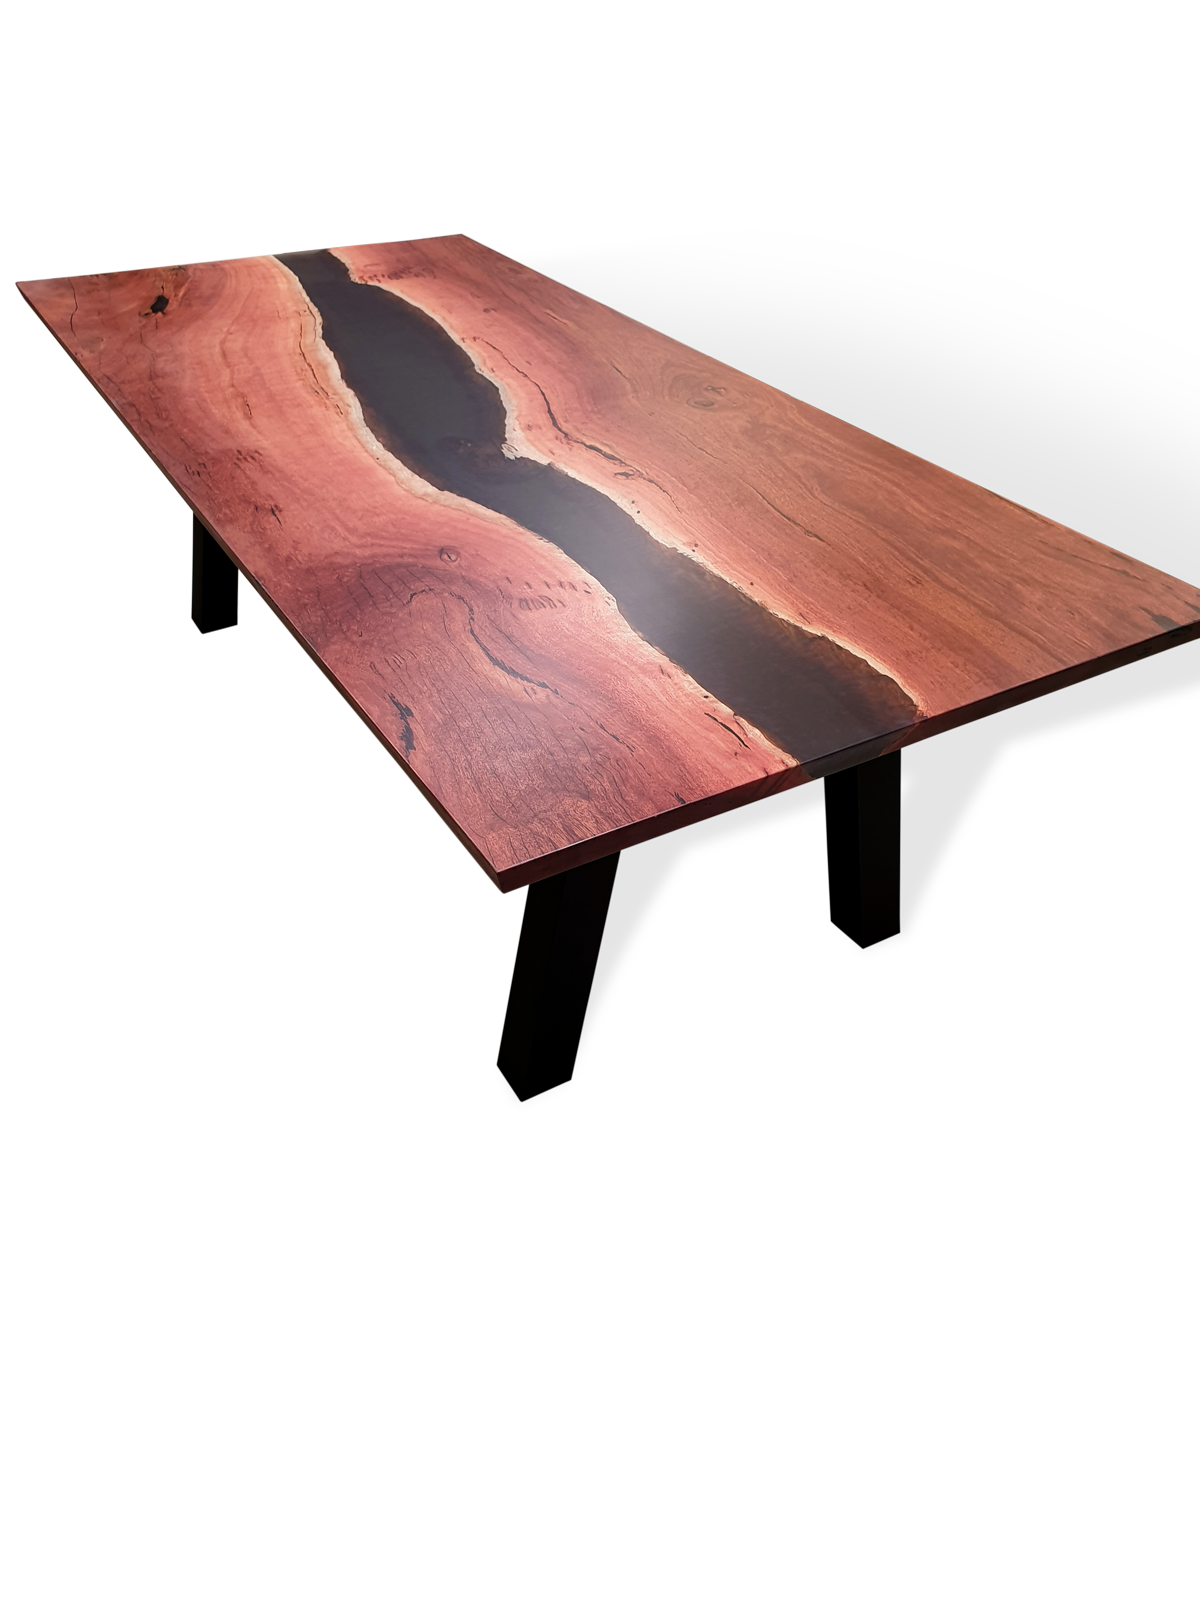 FLOREAT RIVER RESIN TABLE